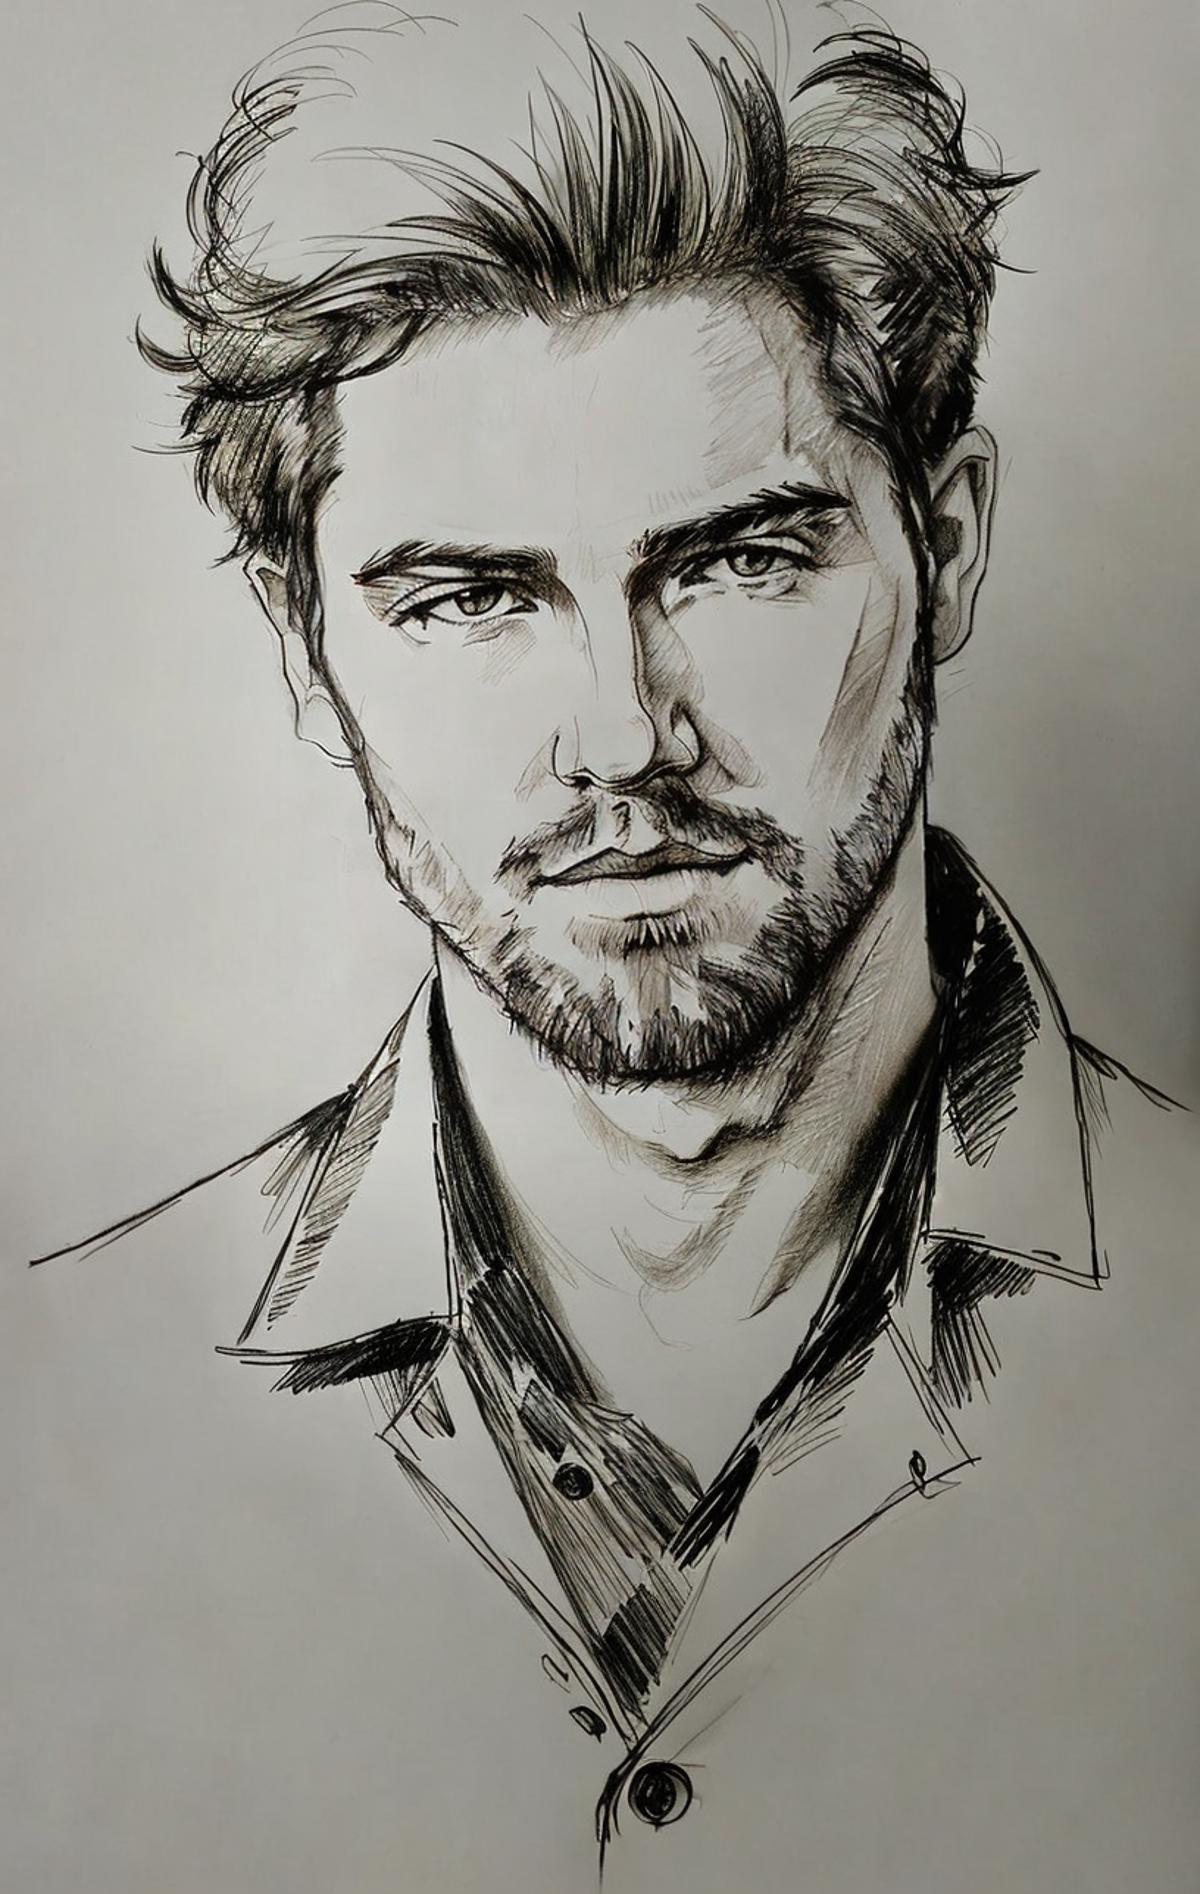 A detailed drawing of a man with a beard wearing a white shirt.